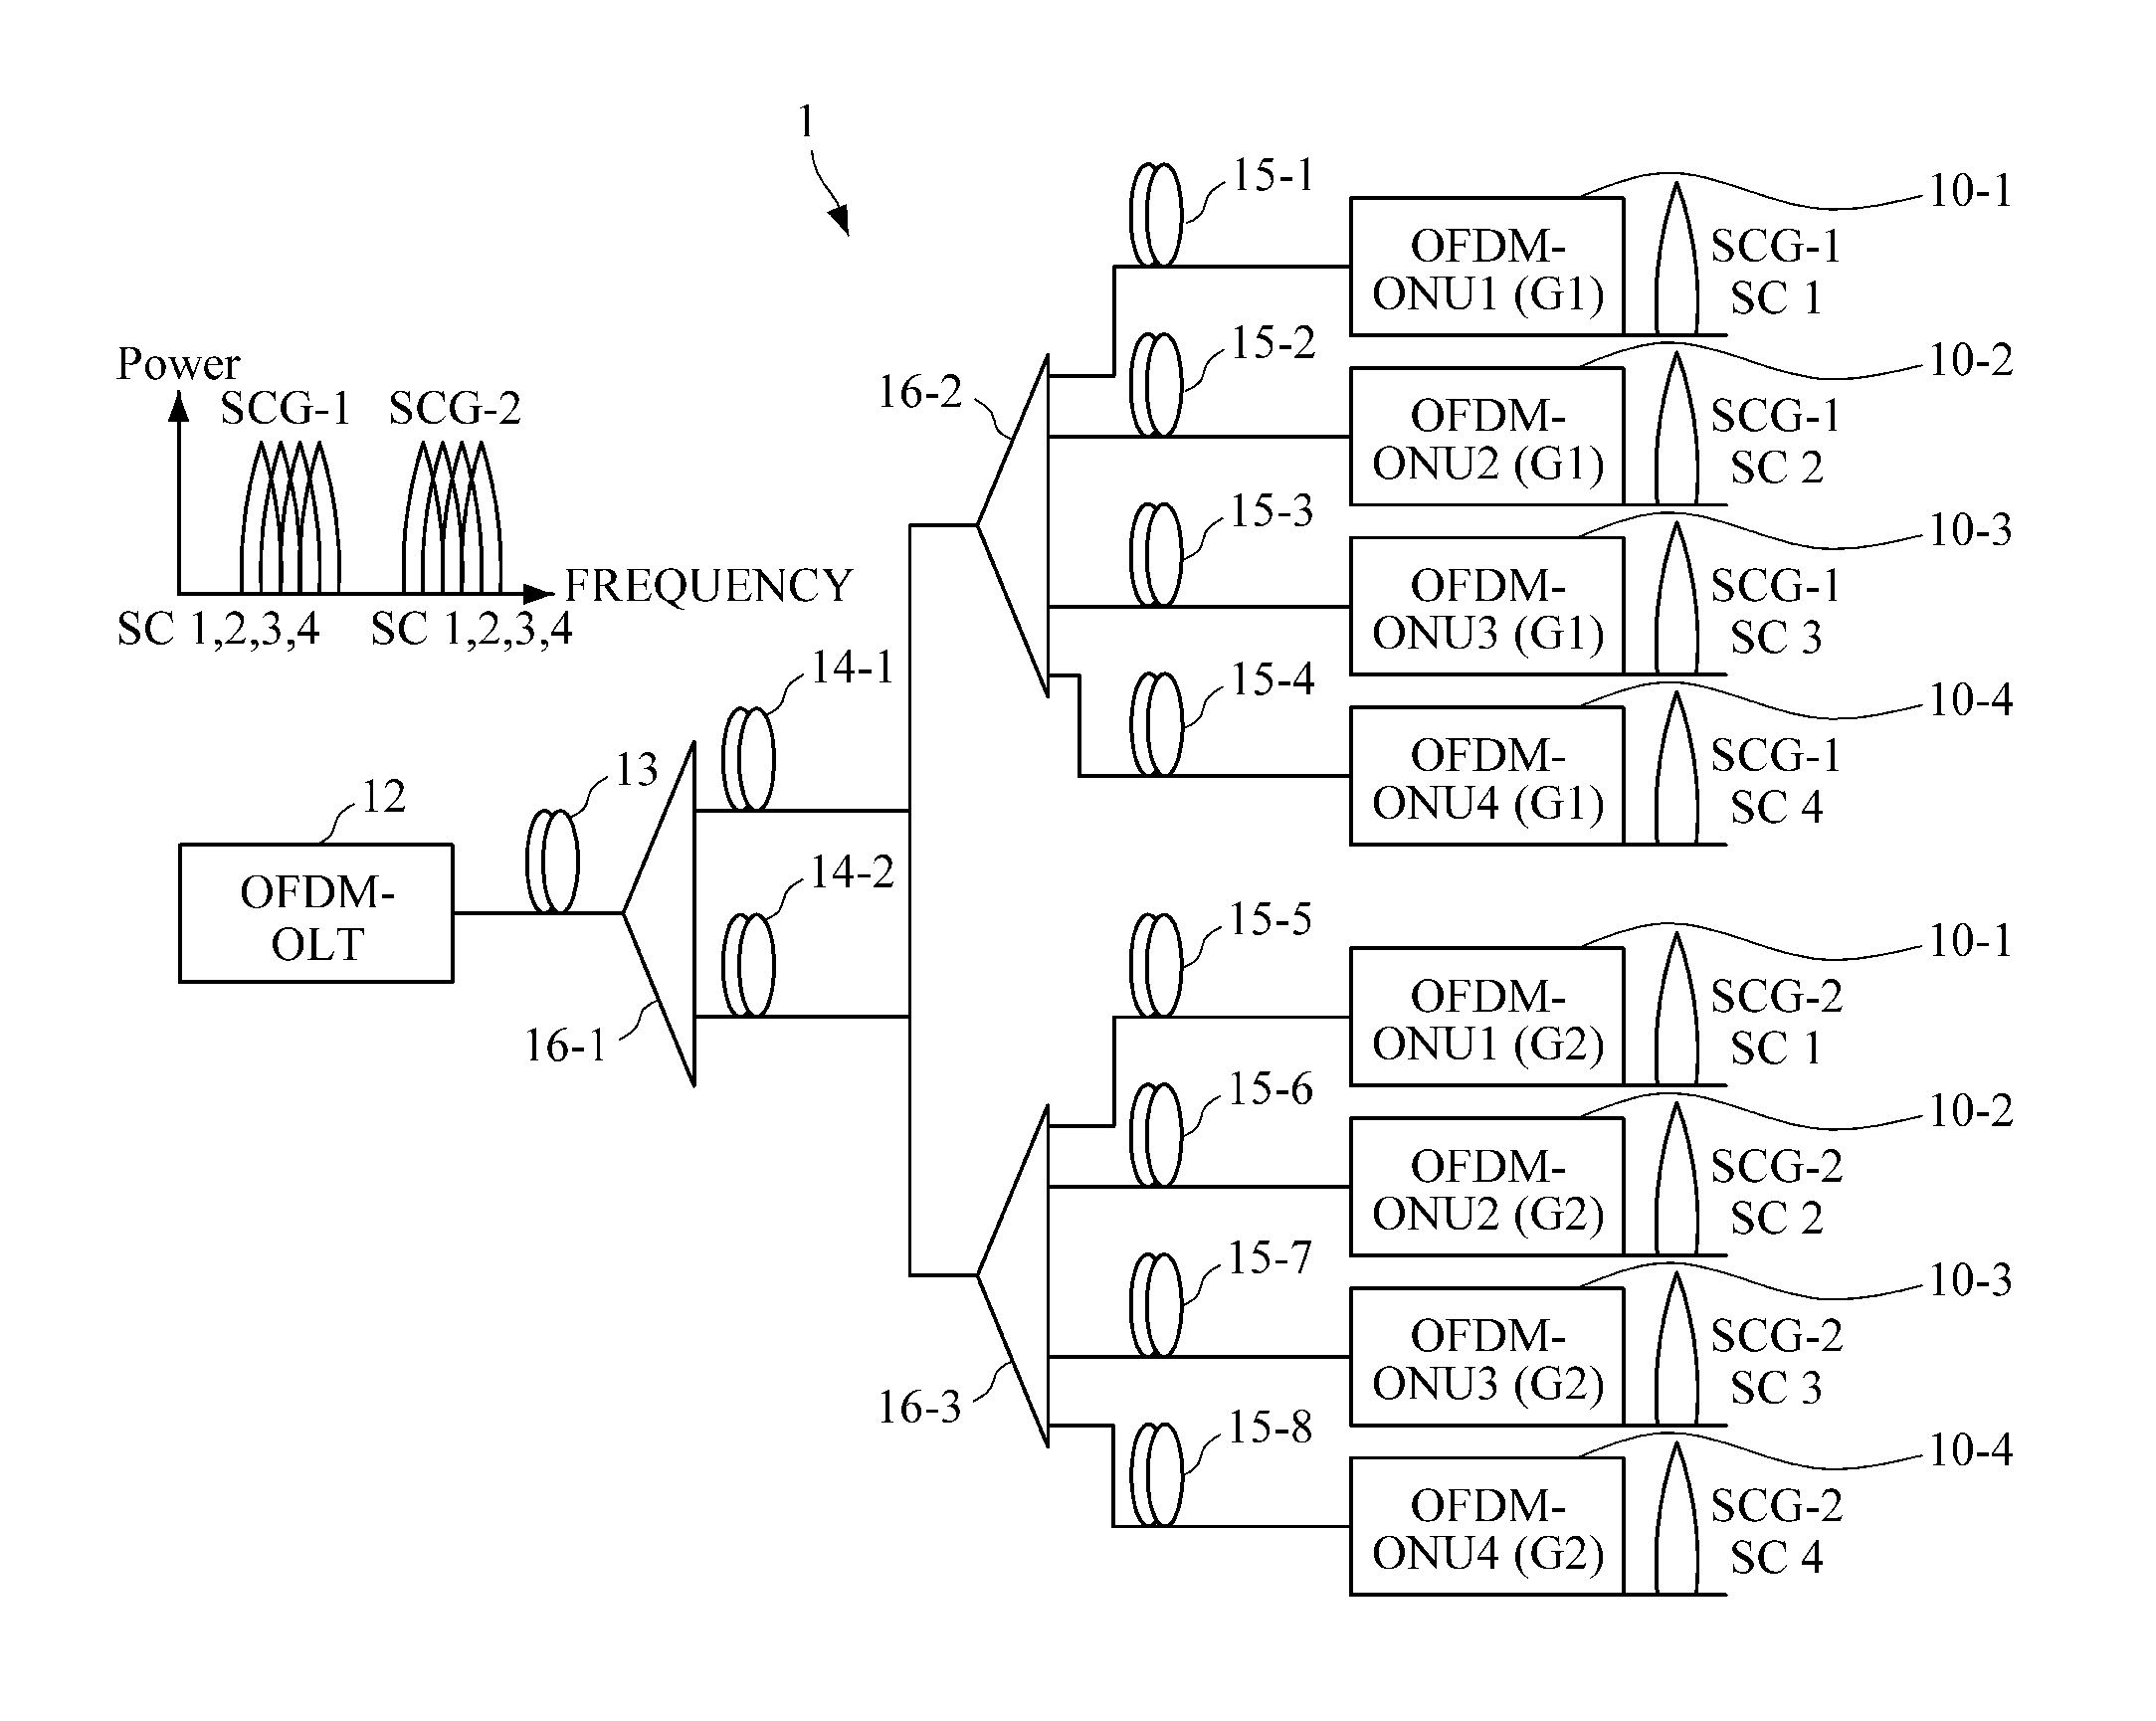 Orthogonal frequency division multiple access-passive optical network comprising optical network unit and optical line terminal